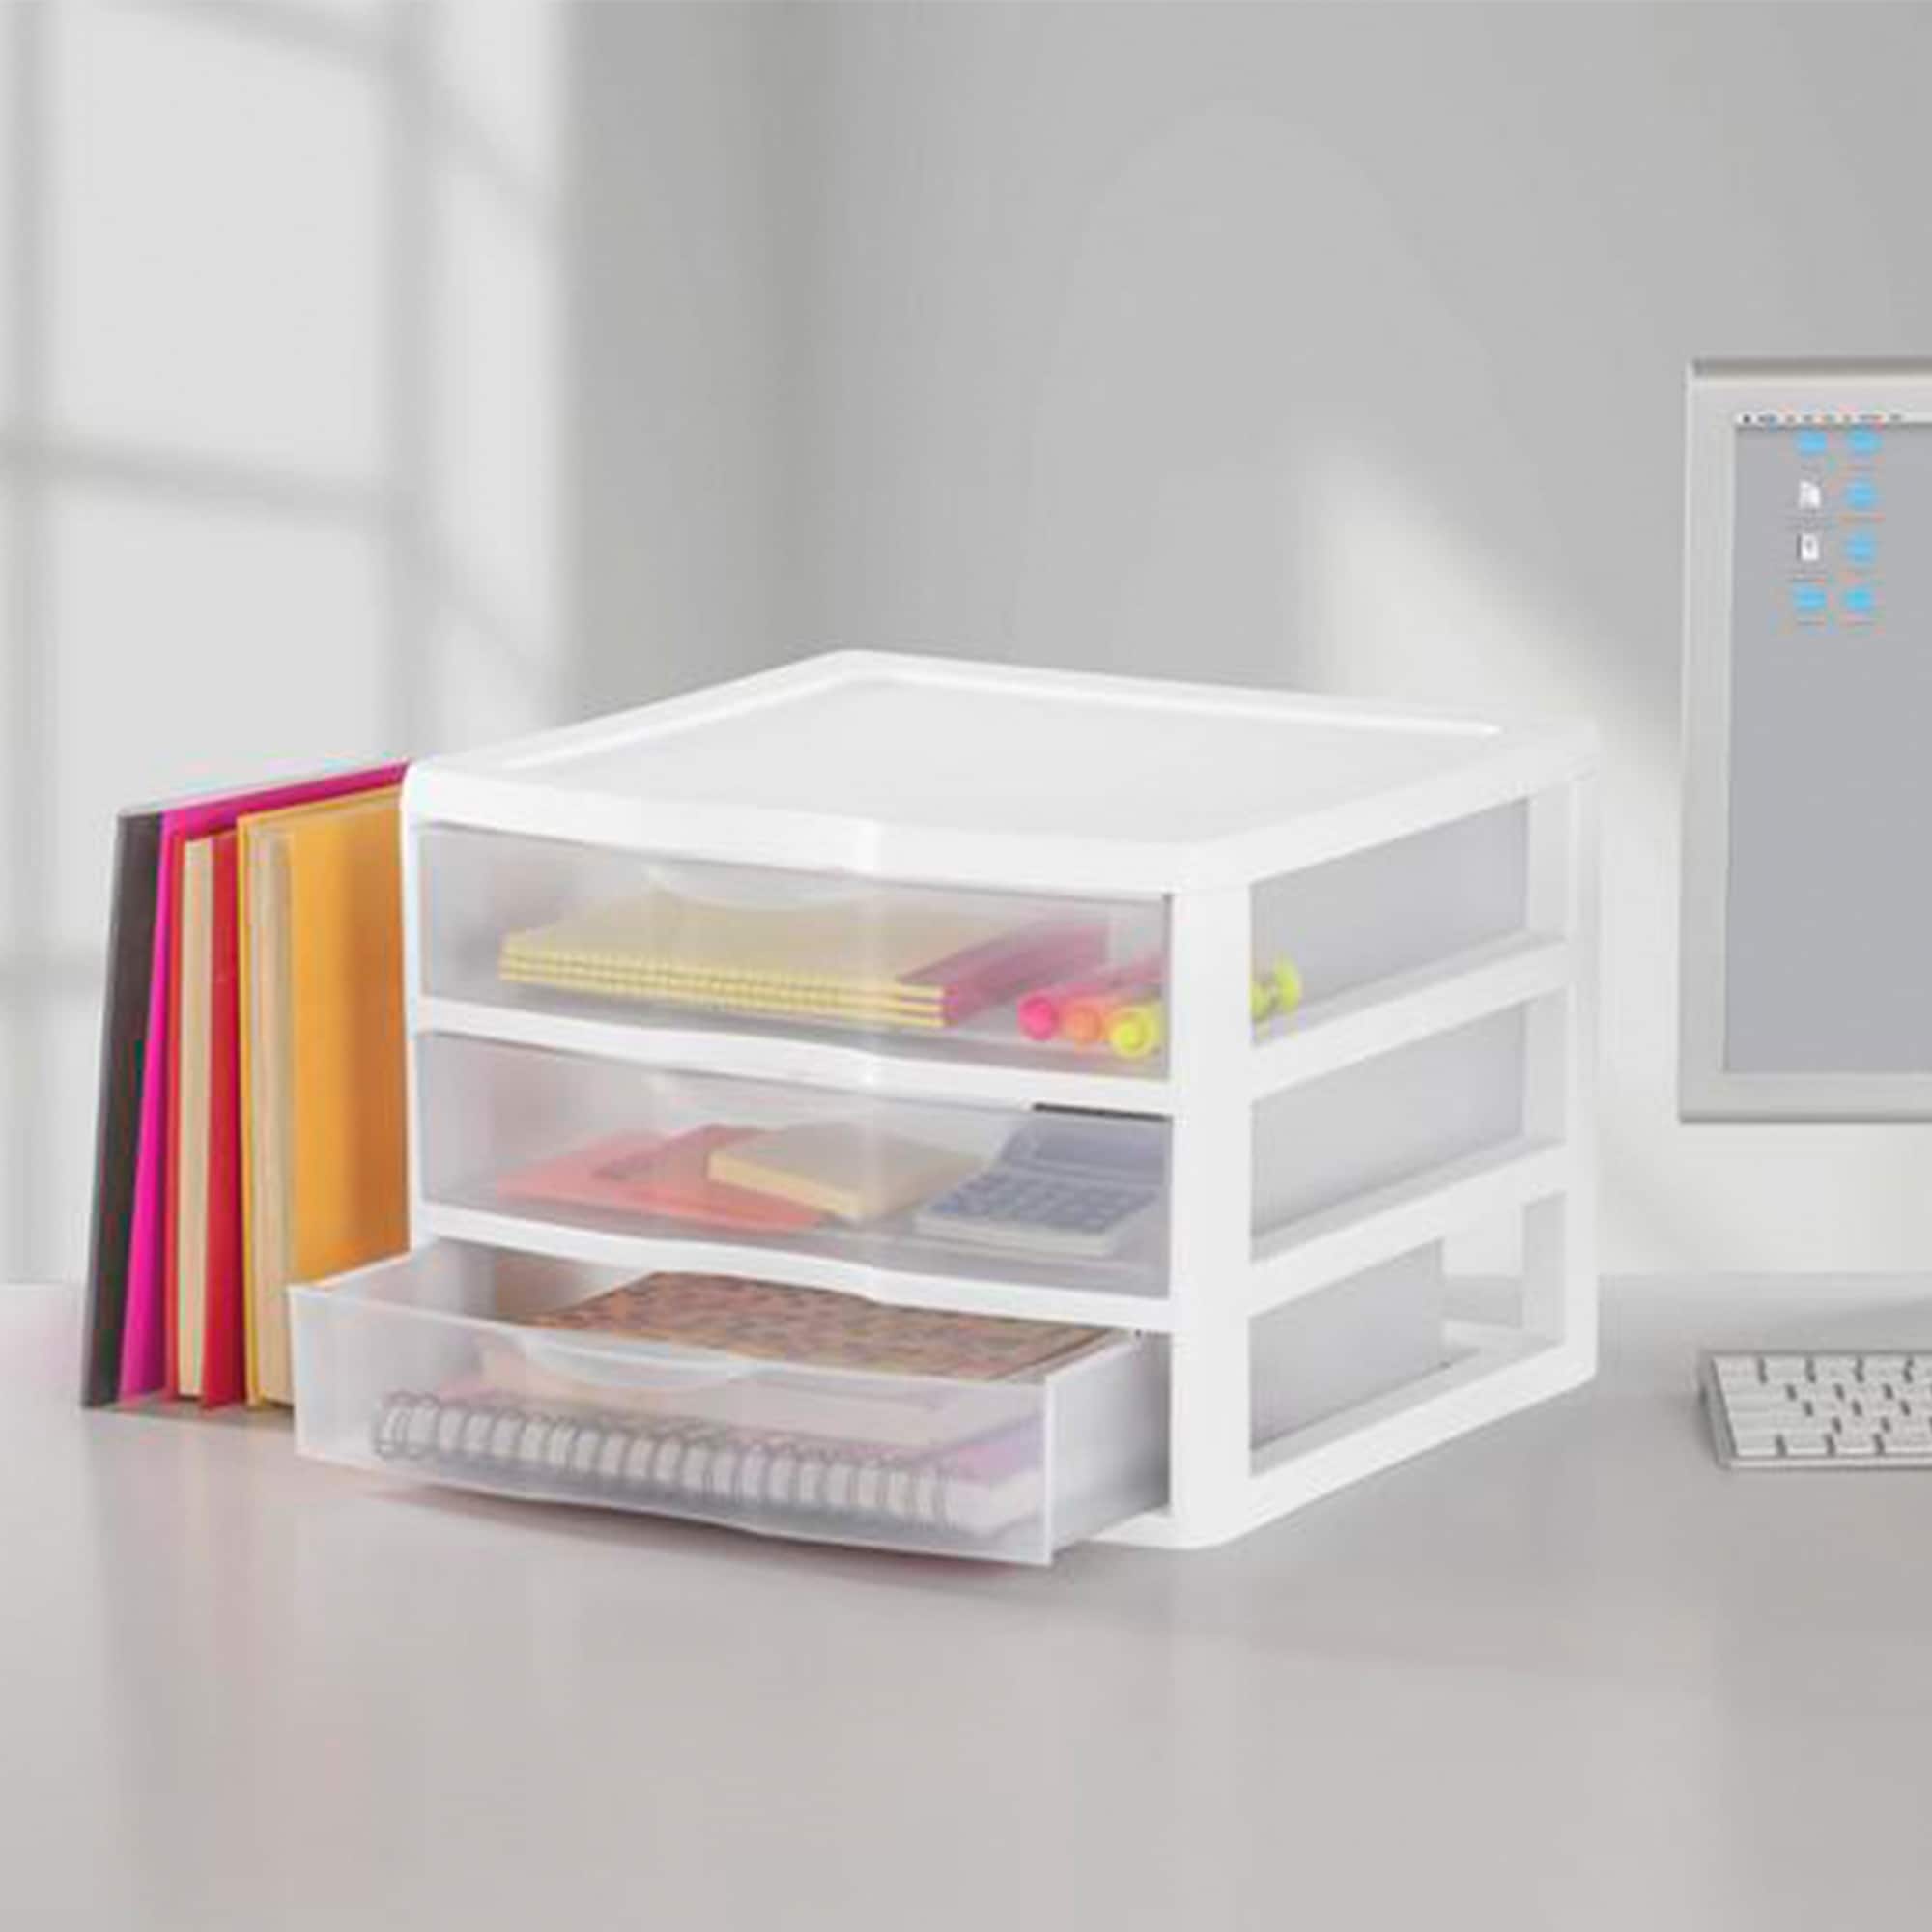 https://ak1.ostkcdn.com/images/products/is/images/direct/5224debe7fc1c8669e09423d10d72e95c0e5bee9/Sterilite-Clear-Plastic-Stackable-Small-3-Drawer-Storage-System%2C-White%2C-%286-Pack%29.jpg